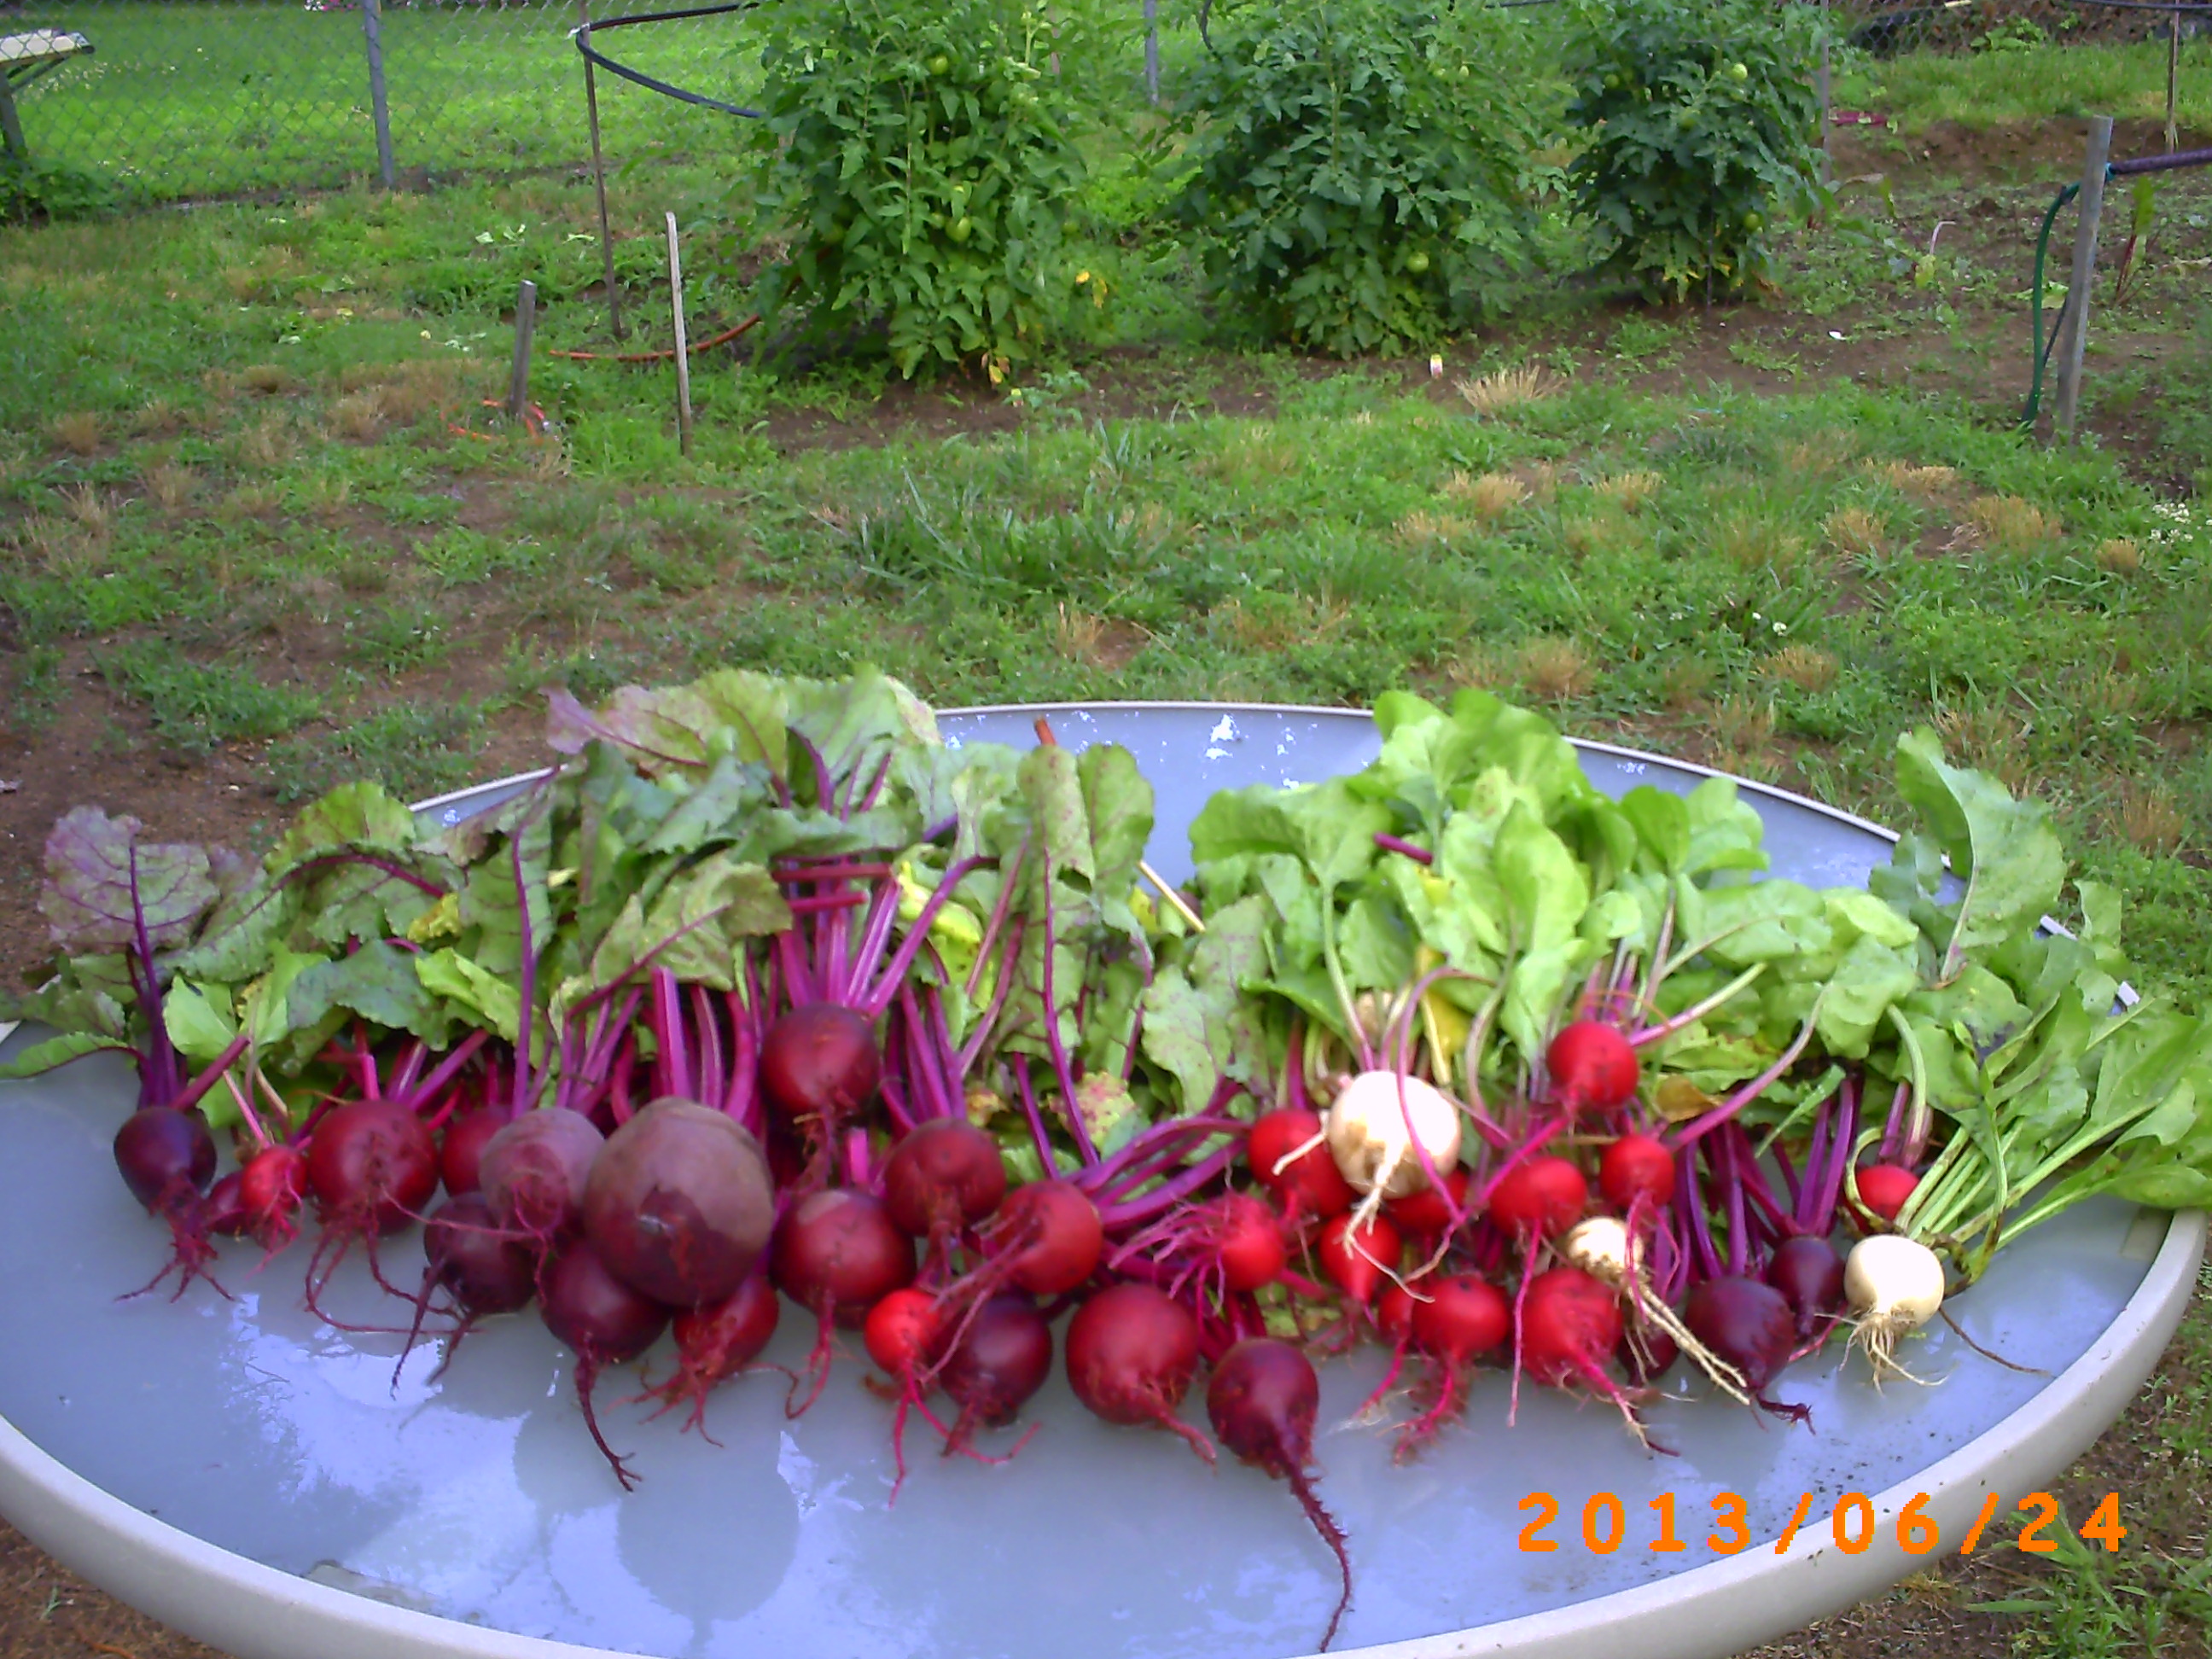 Beets. This is the second harvest from the first planting.